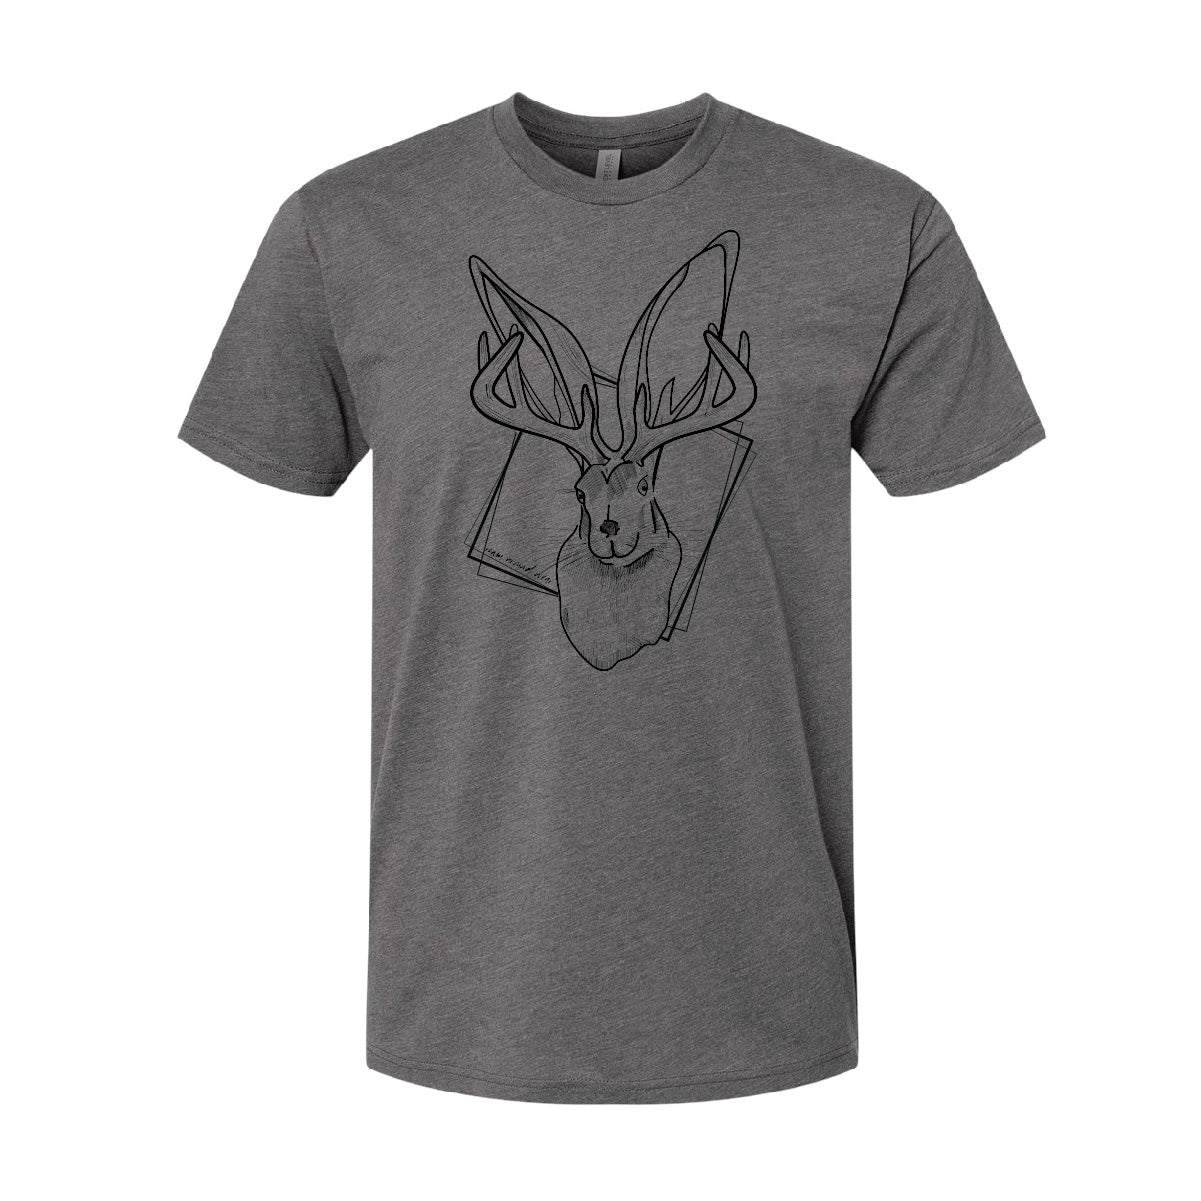 Roam Around Wear is a Wyoming t-shirt company based out of Gillette, Wyoming. Wyoming Jackalope  t-shirt. Unisex tee shirt. Artisan designed.